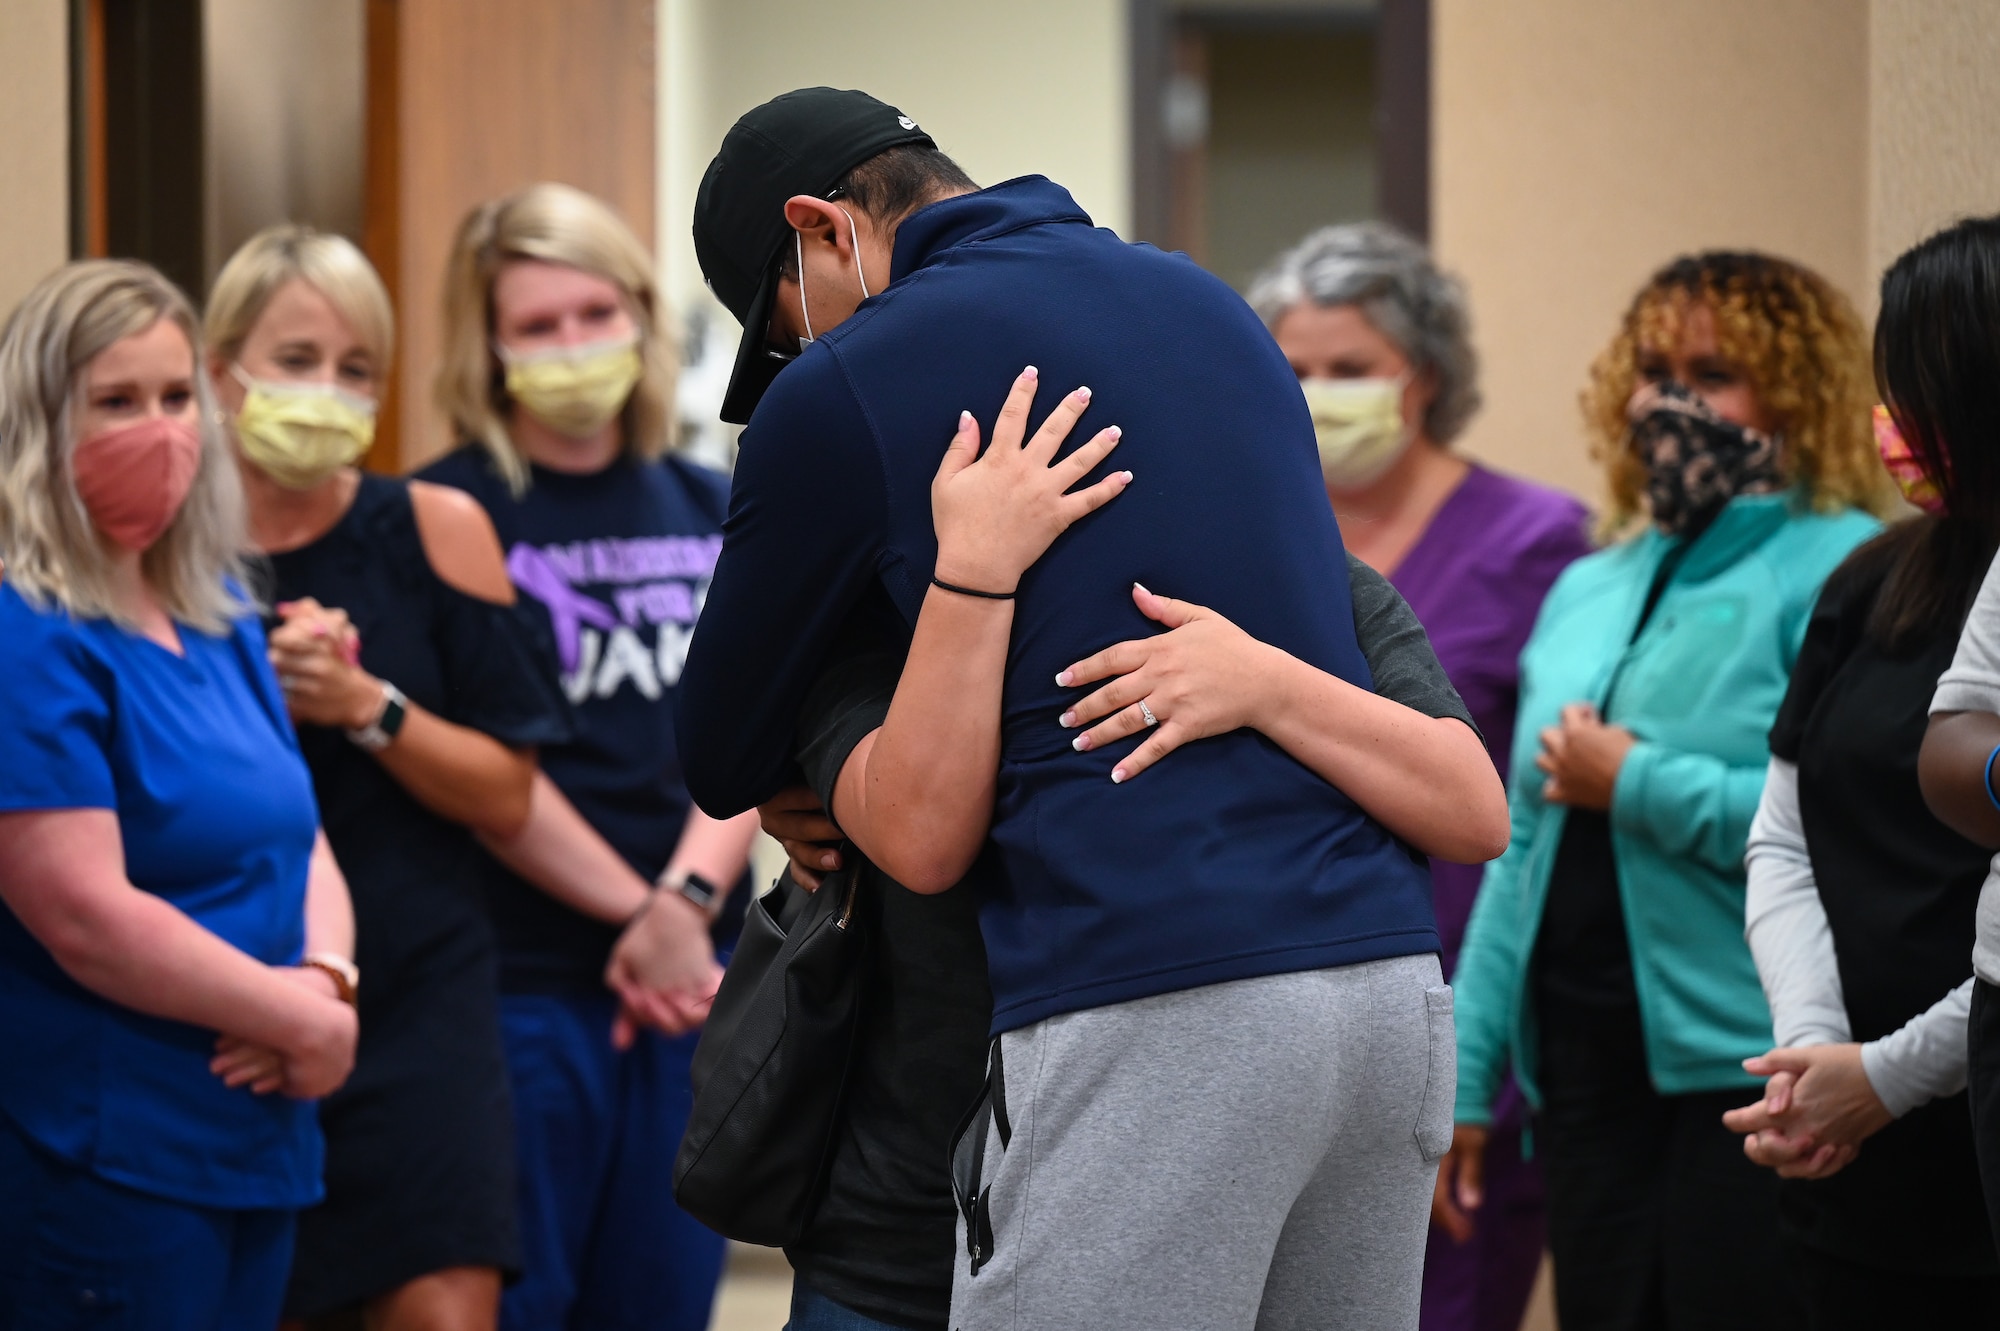 Senior Airman Eleazar Hernandez, 2nd Maintenance Squadron aerospace ground equipment journeyman, hugs his spouse after his final chemotherapy treatment at the CHRISTUS Health Shreveport-Bossier medical center, Louisiana, July 2, 2021. Hernandez fought cancer for 6 months before entering remission. (U.S. Air Force photo by Airman 1st Class Jonathan E. Ramos)